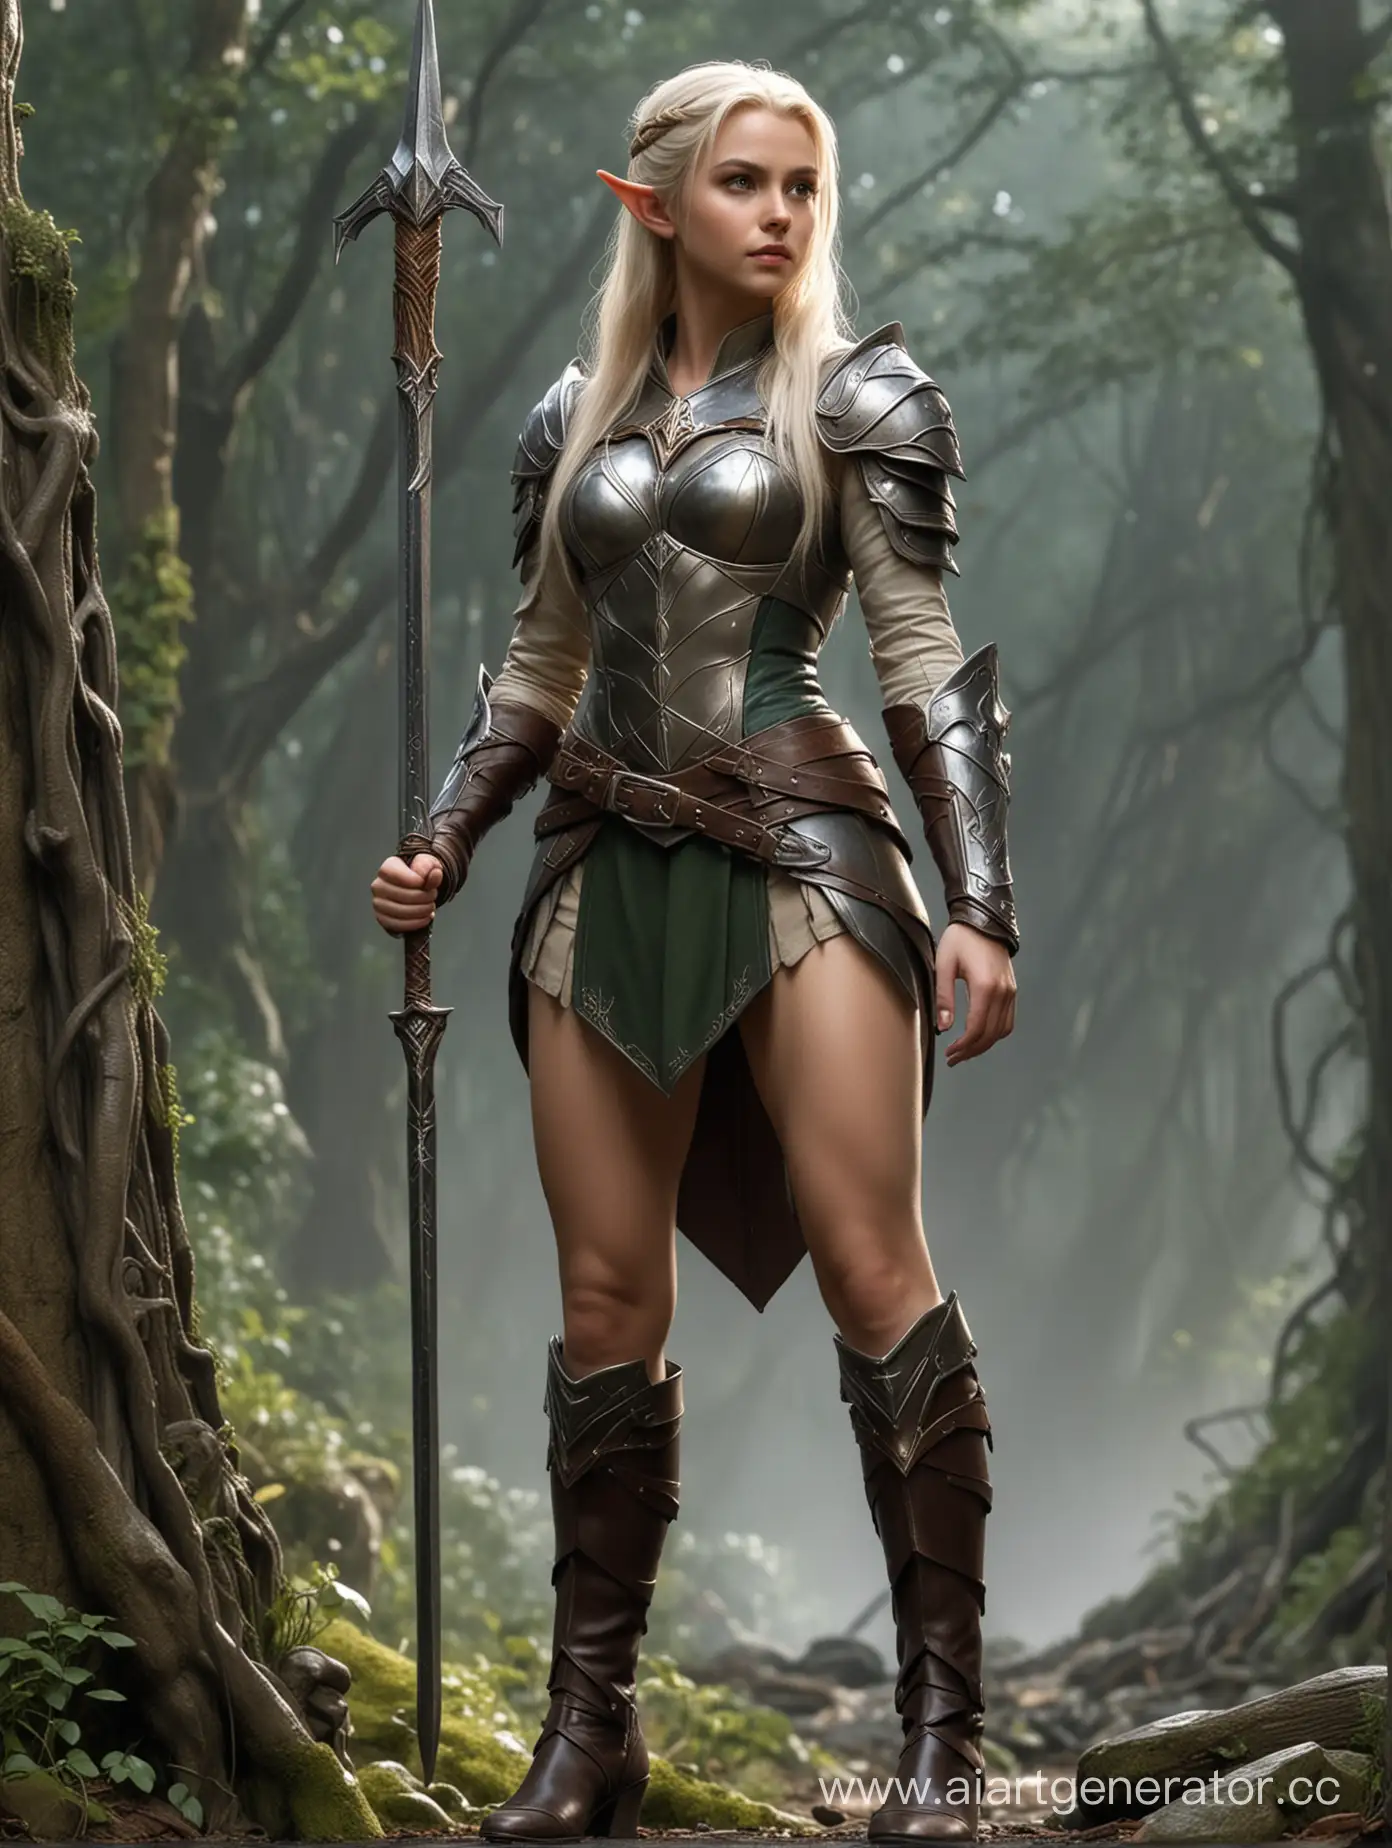 Elven-Warrior-Maiden-Poses-in-Armor-and-Skirt-Lord-of-the-Rings-Inspired-Art